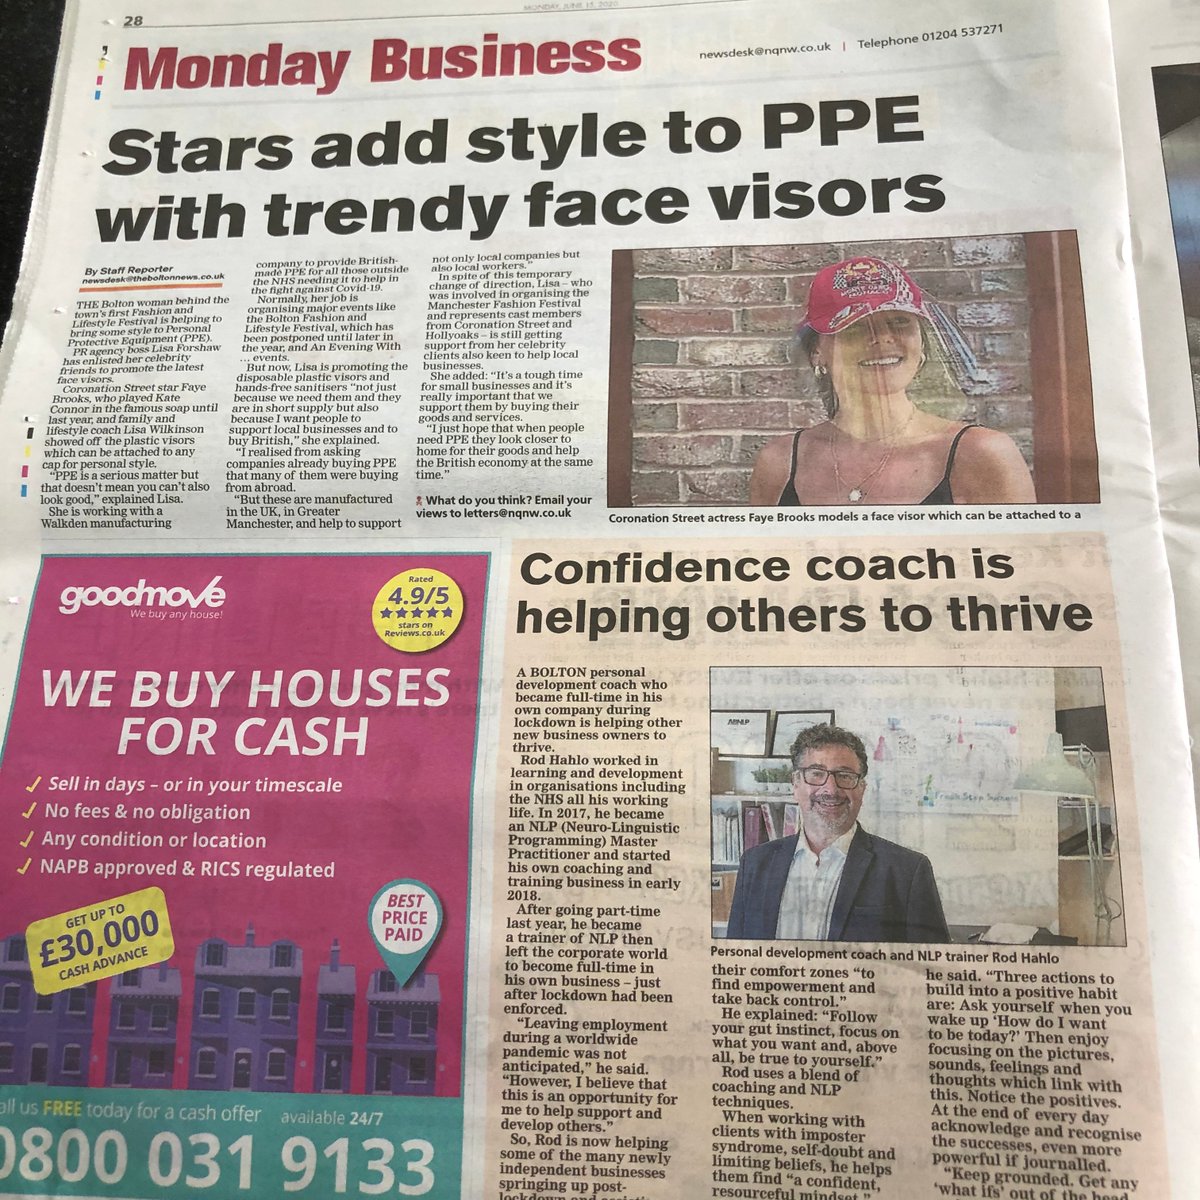 Thanks Bolton News for using articles about two of our Bounce Back to Business Media & Marketing Plan clients. Really appreciate support for local businesses. #lisaforshawpr #newperspectiveNLP #deferoconsultancy